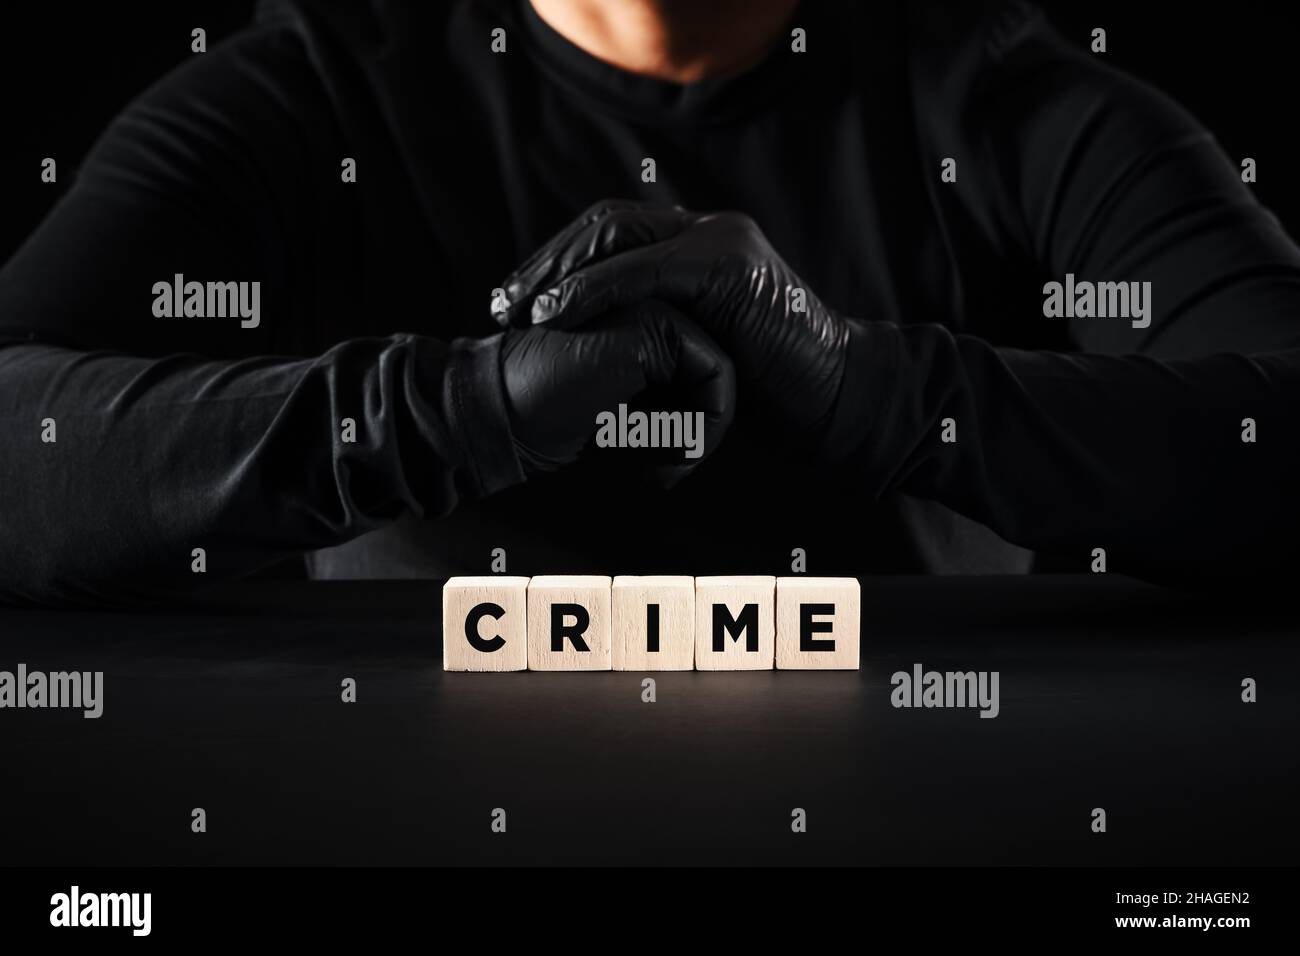 Crime, criminal or criminality concept. Criminal wearing black gloves with clasped hands sits behind the wooden blocks with the word crime. Stock Photo